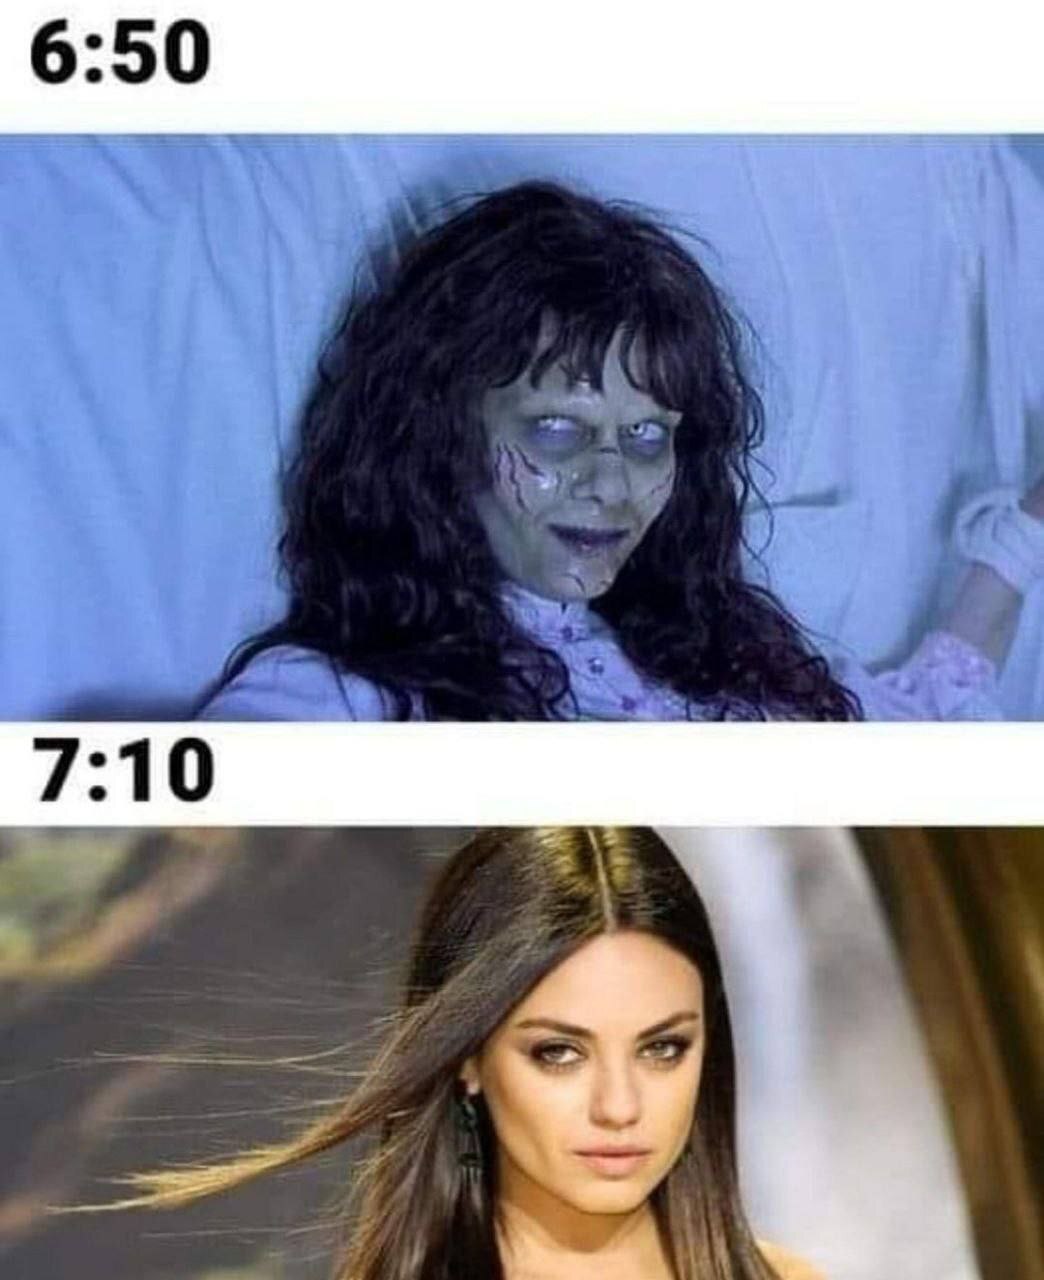 In the morning - Humor, Picture with text, Women, Makeup